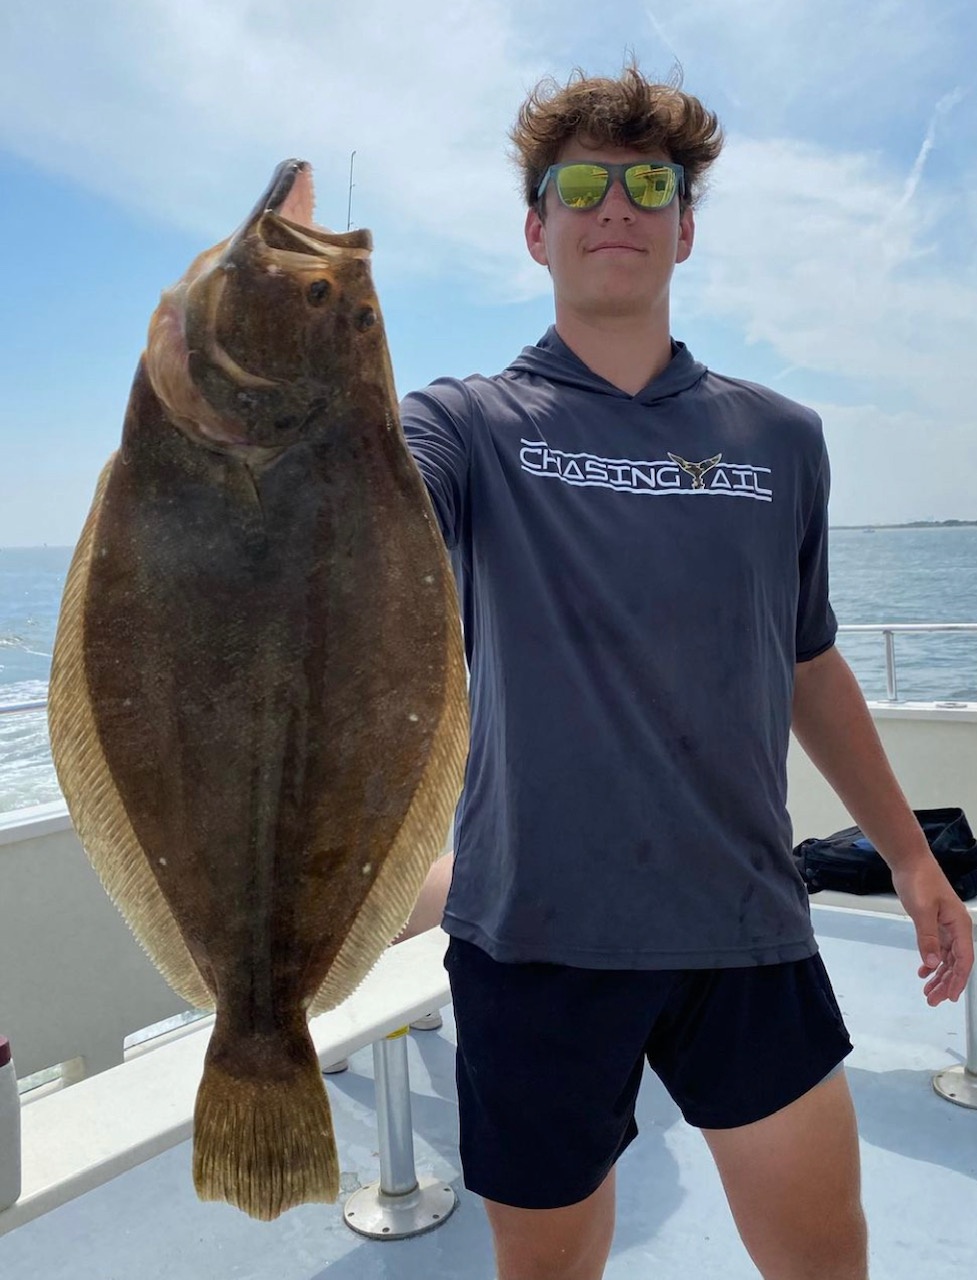 Ben caught this nice keeper fluke from the Miss Beach Haven with his